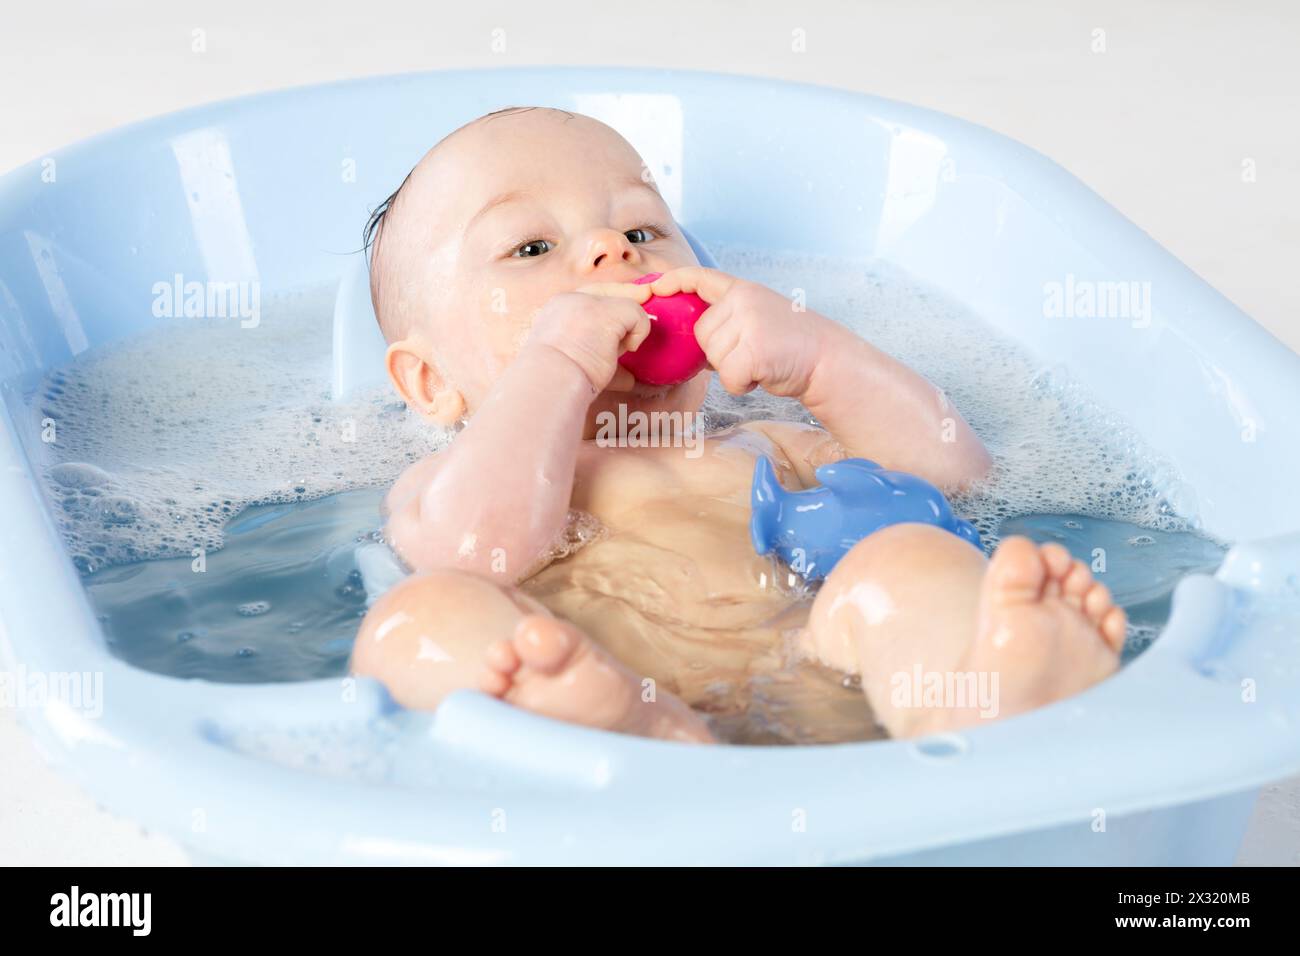 Baby girl bathes in a bathtube with toys Stock Photo